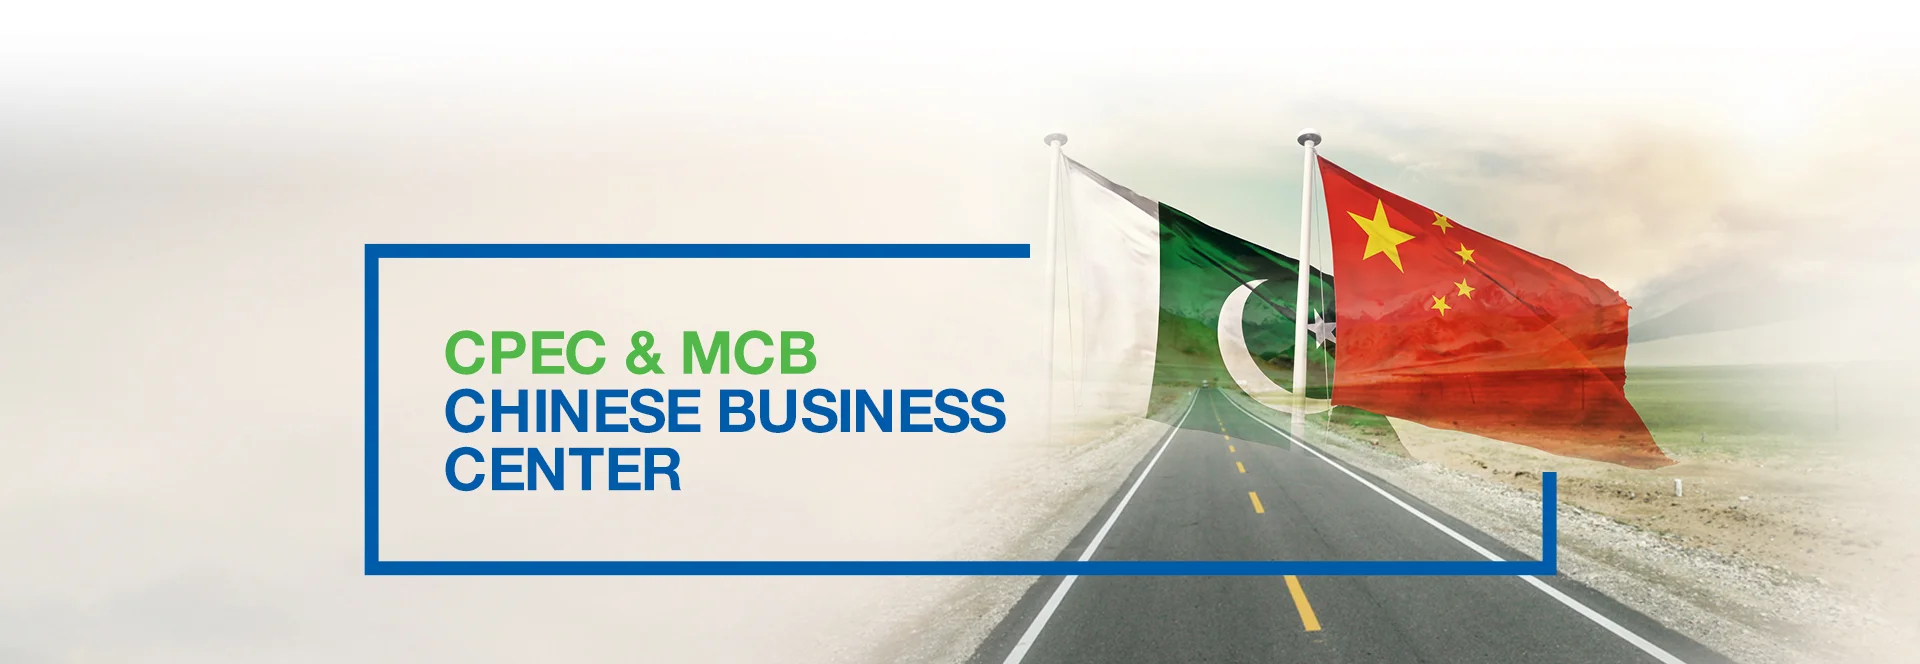 CPEC & MCB Chinese Business Center